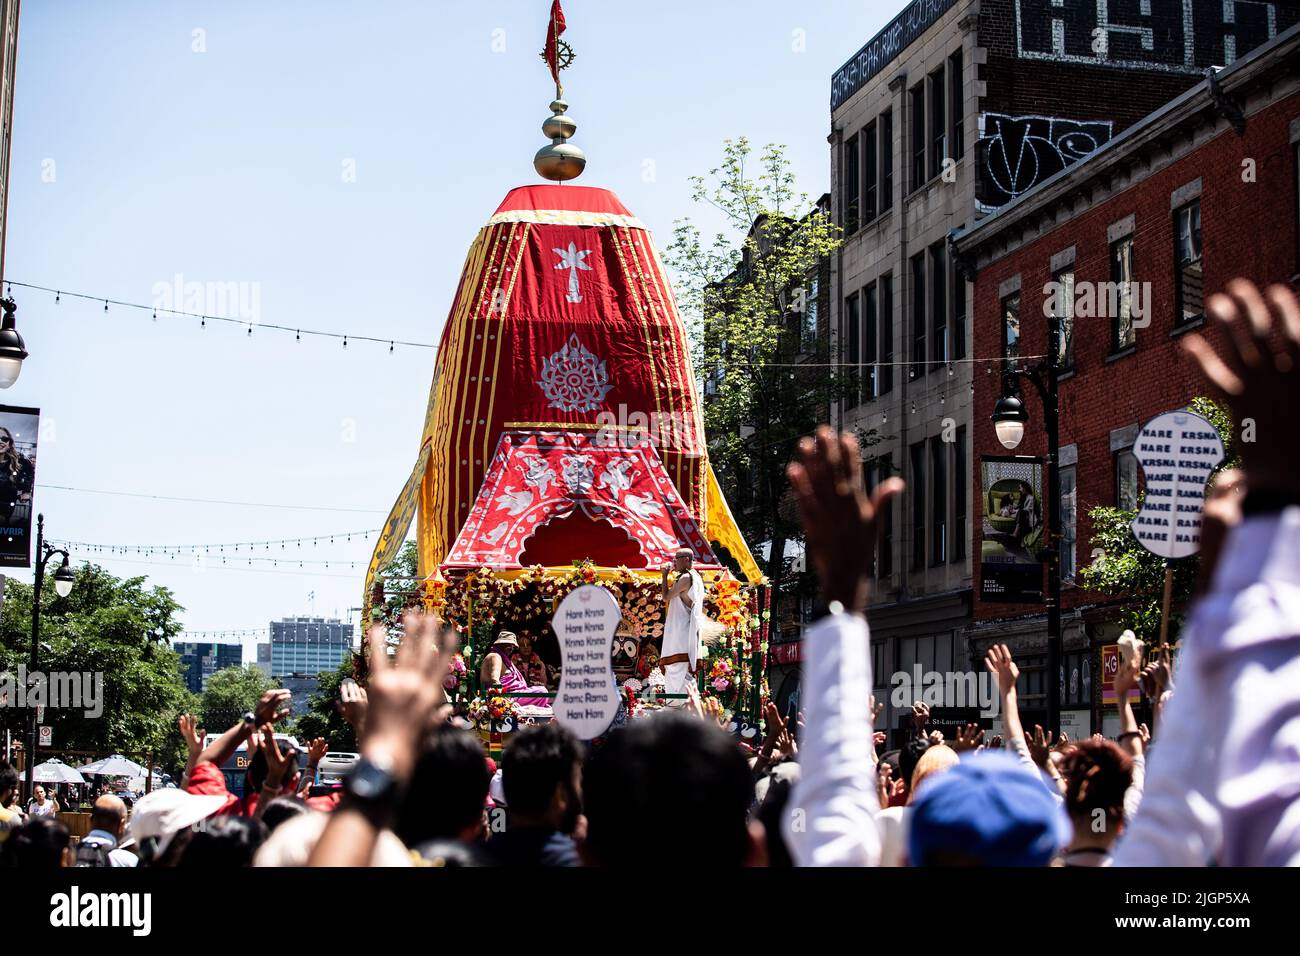 The crowd of devotees march with the main float cart during the celebration. Stock Photo